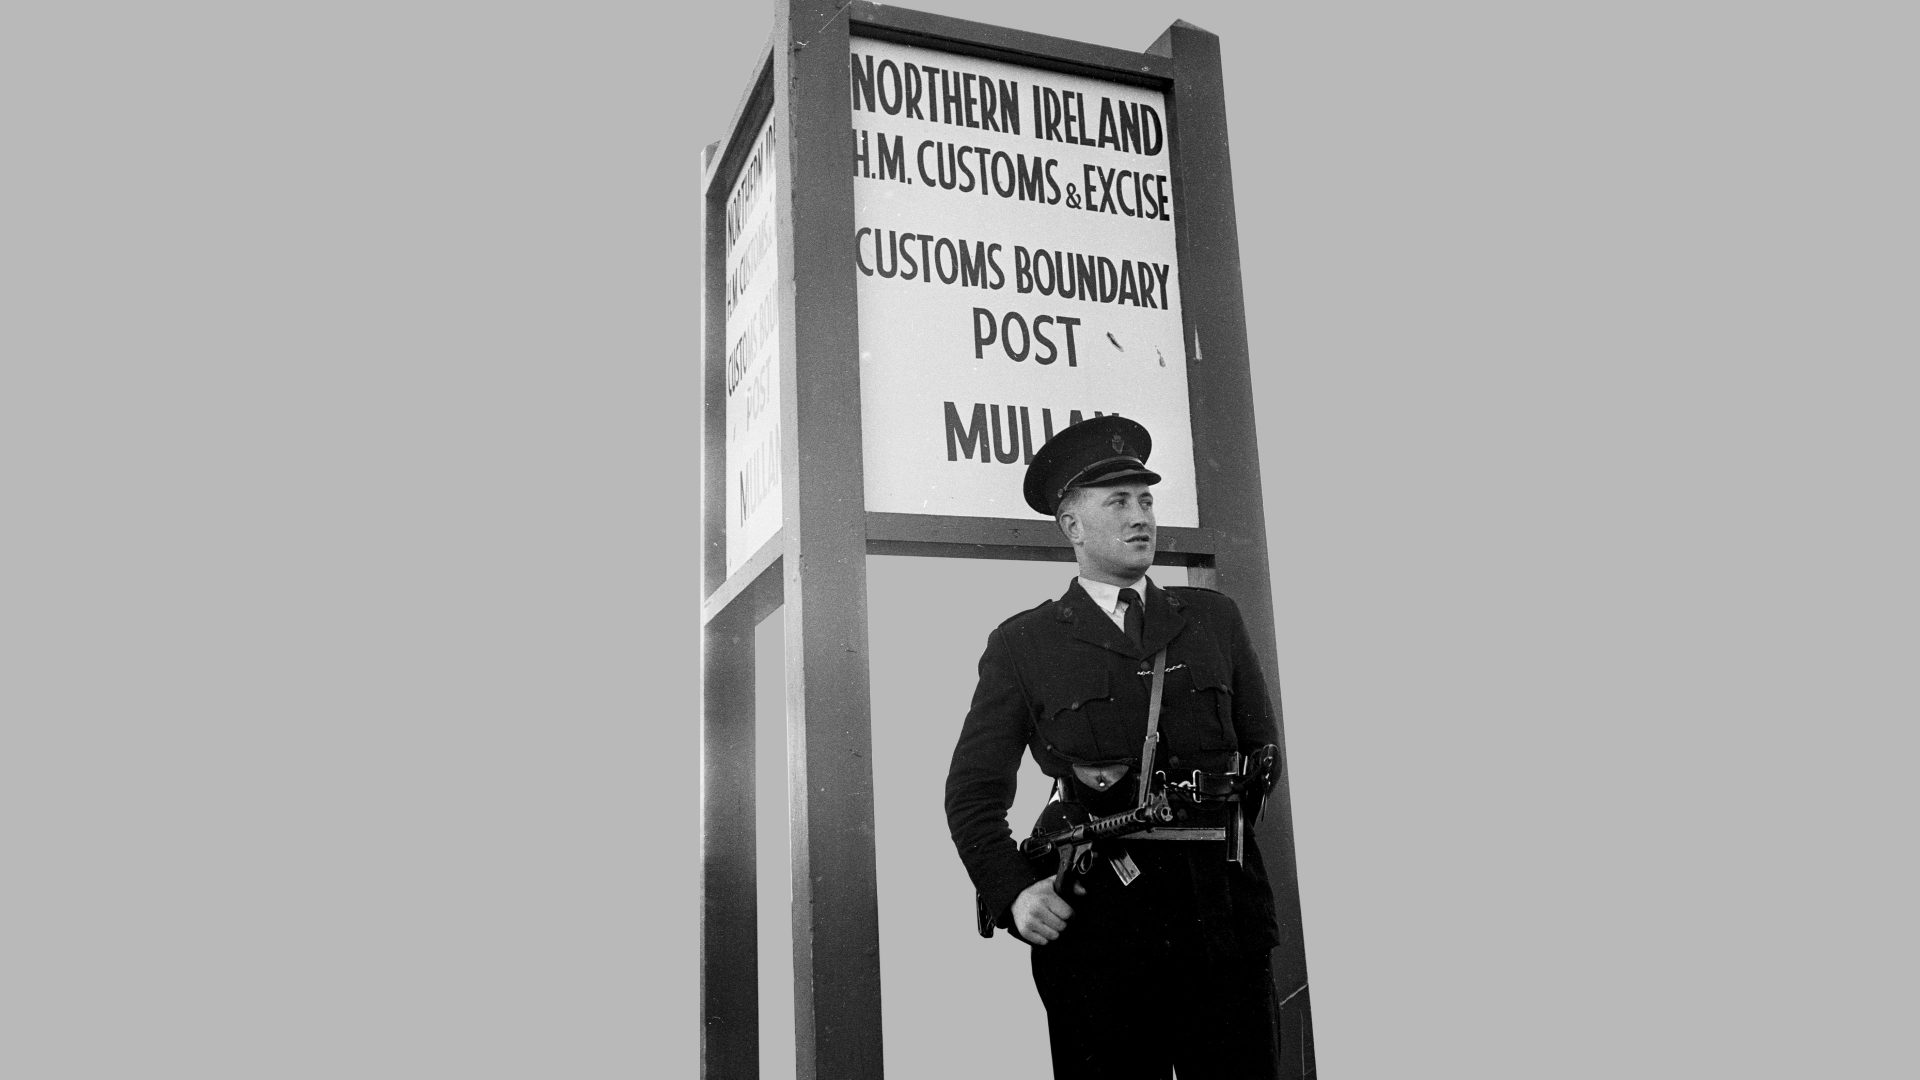 September 1961: A member of the Royal Ulster Constabulary (RUC) stands guard at a customs boundary post in Northern Ireland. Photo: Keystone Features/Getty Images